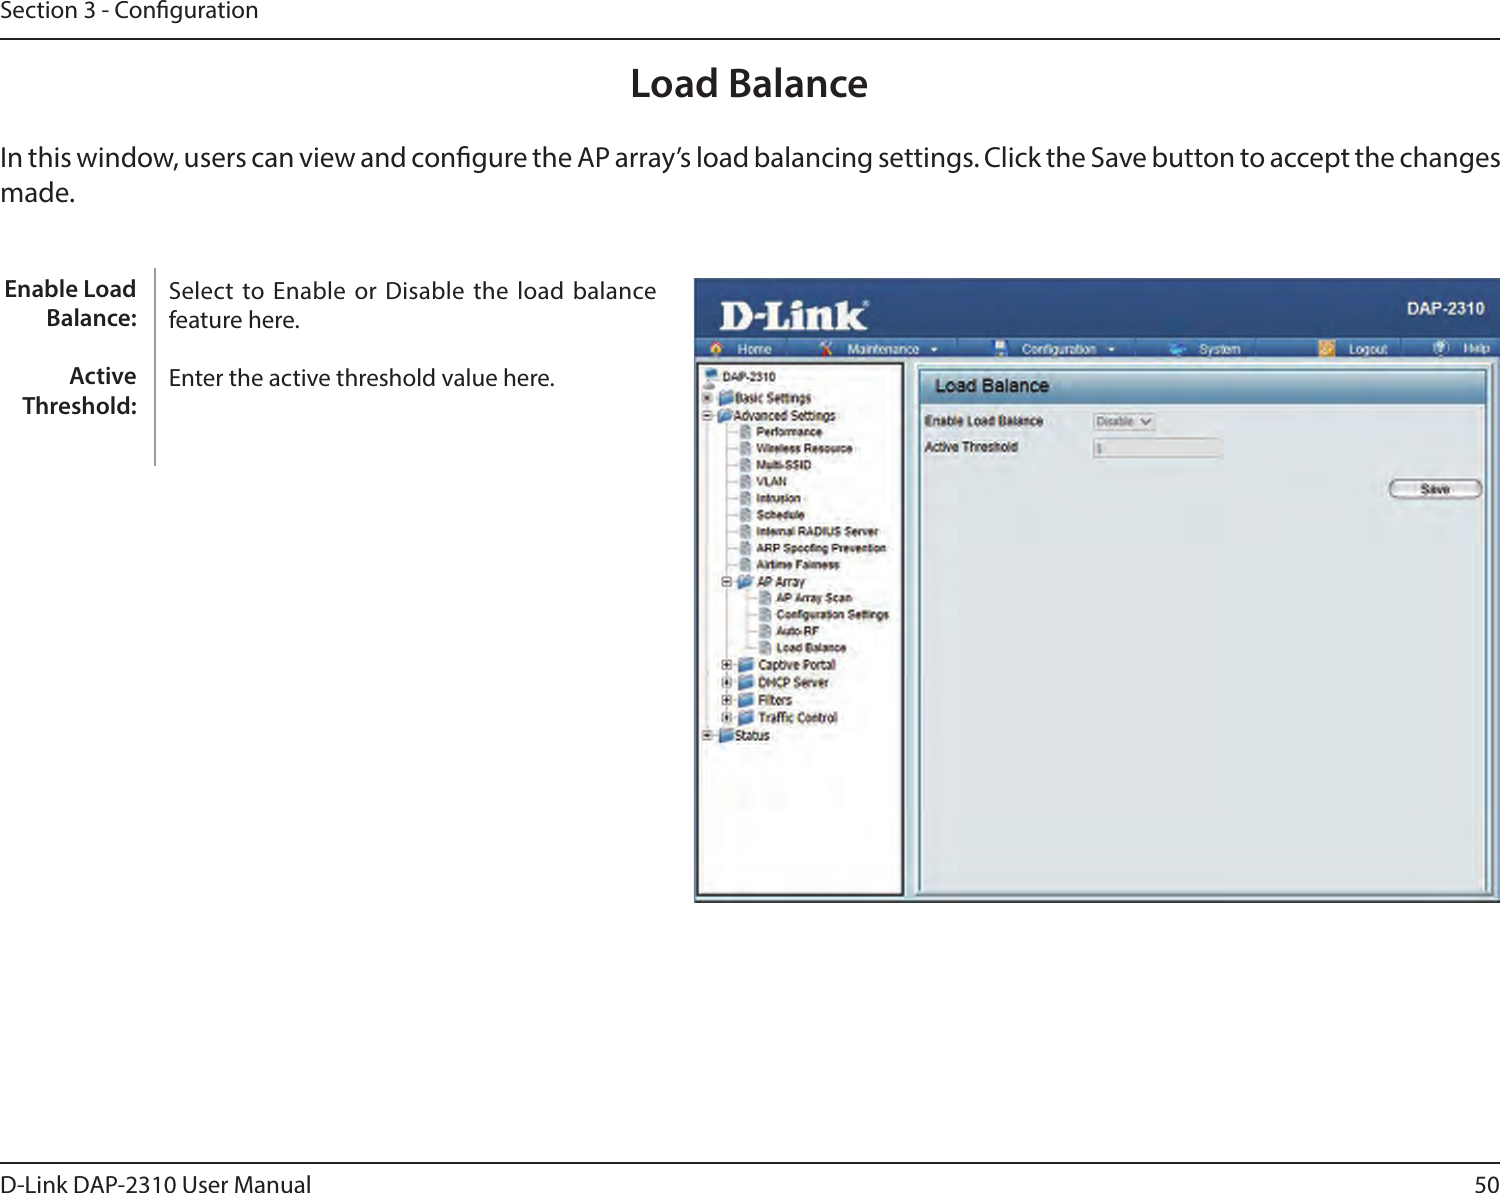 50D-Link DAP-2310 User ManualSection 3 - CongurationLoad BalanceIn this window, users can view and congure the AP array’s load balancing settings. Click the Save button to accept the changes made.Select  to Enable or  Disable the load  balance feature here.Enter the active threshold value here.Enable Load Balance:Active Threshold: